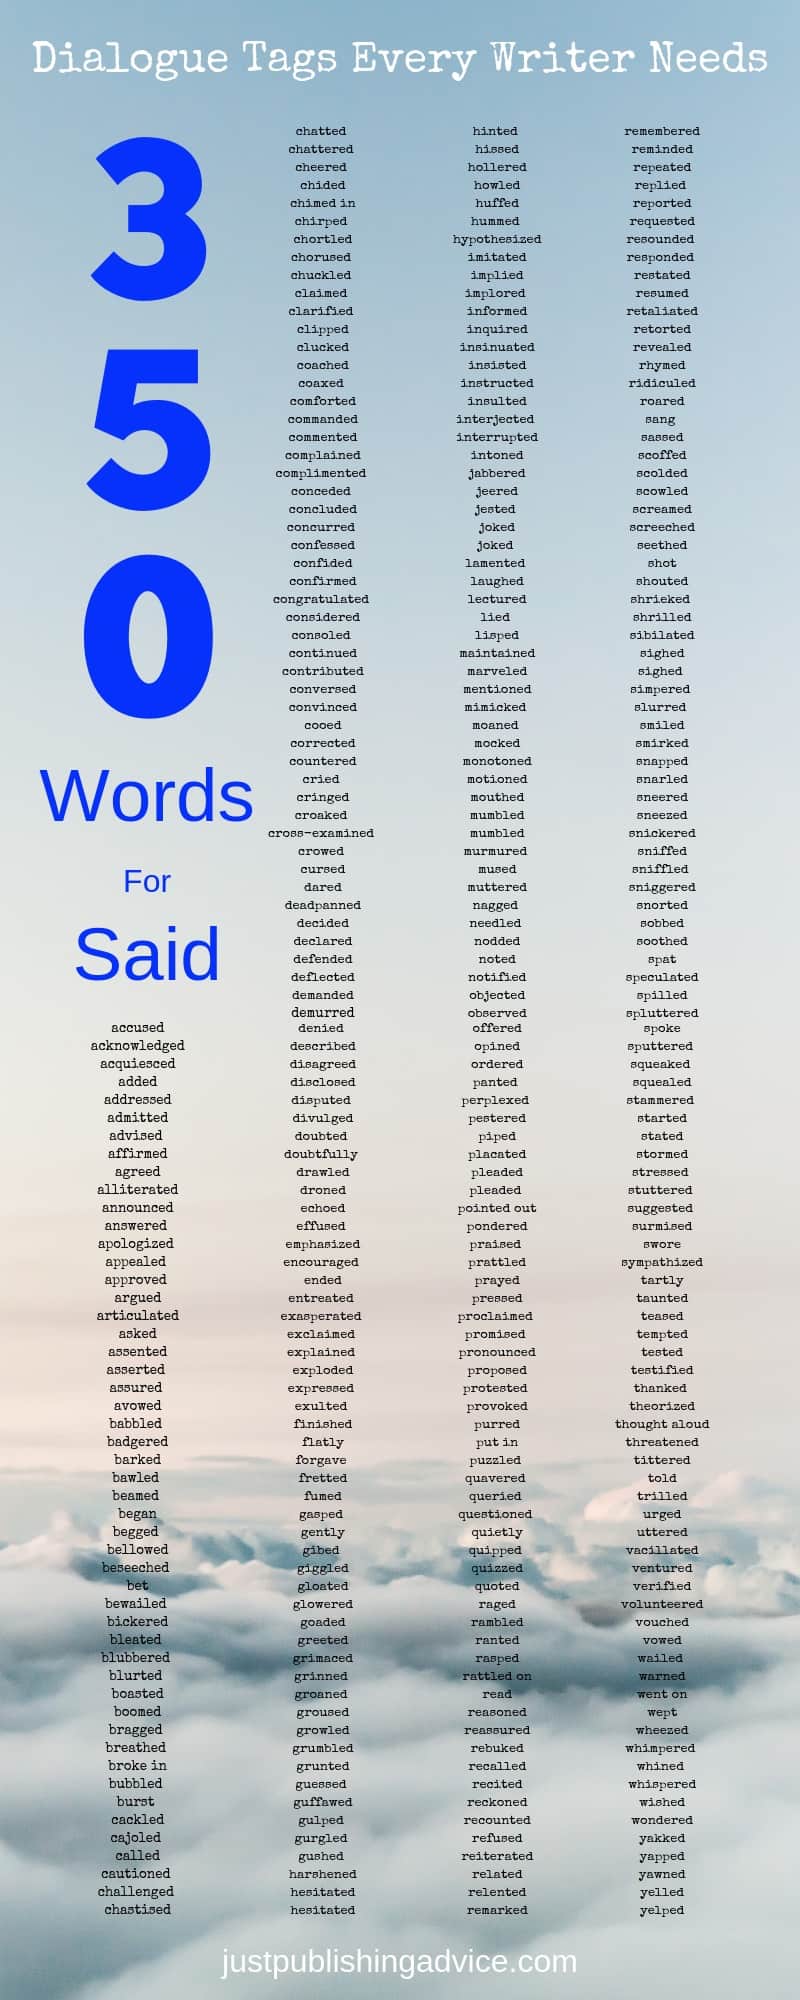 350 other words for said you can use - infographic